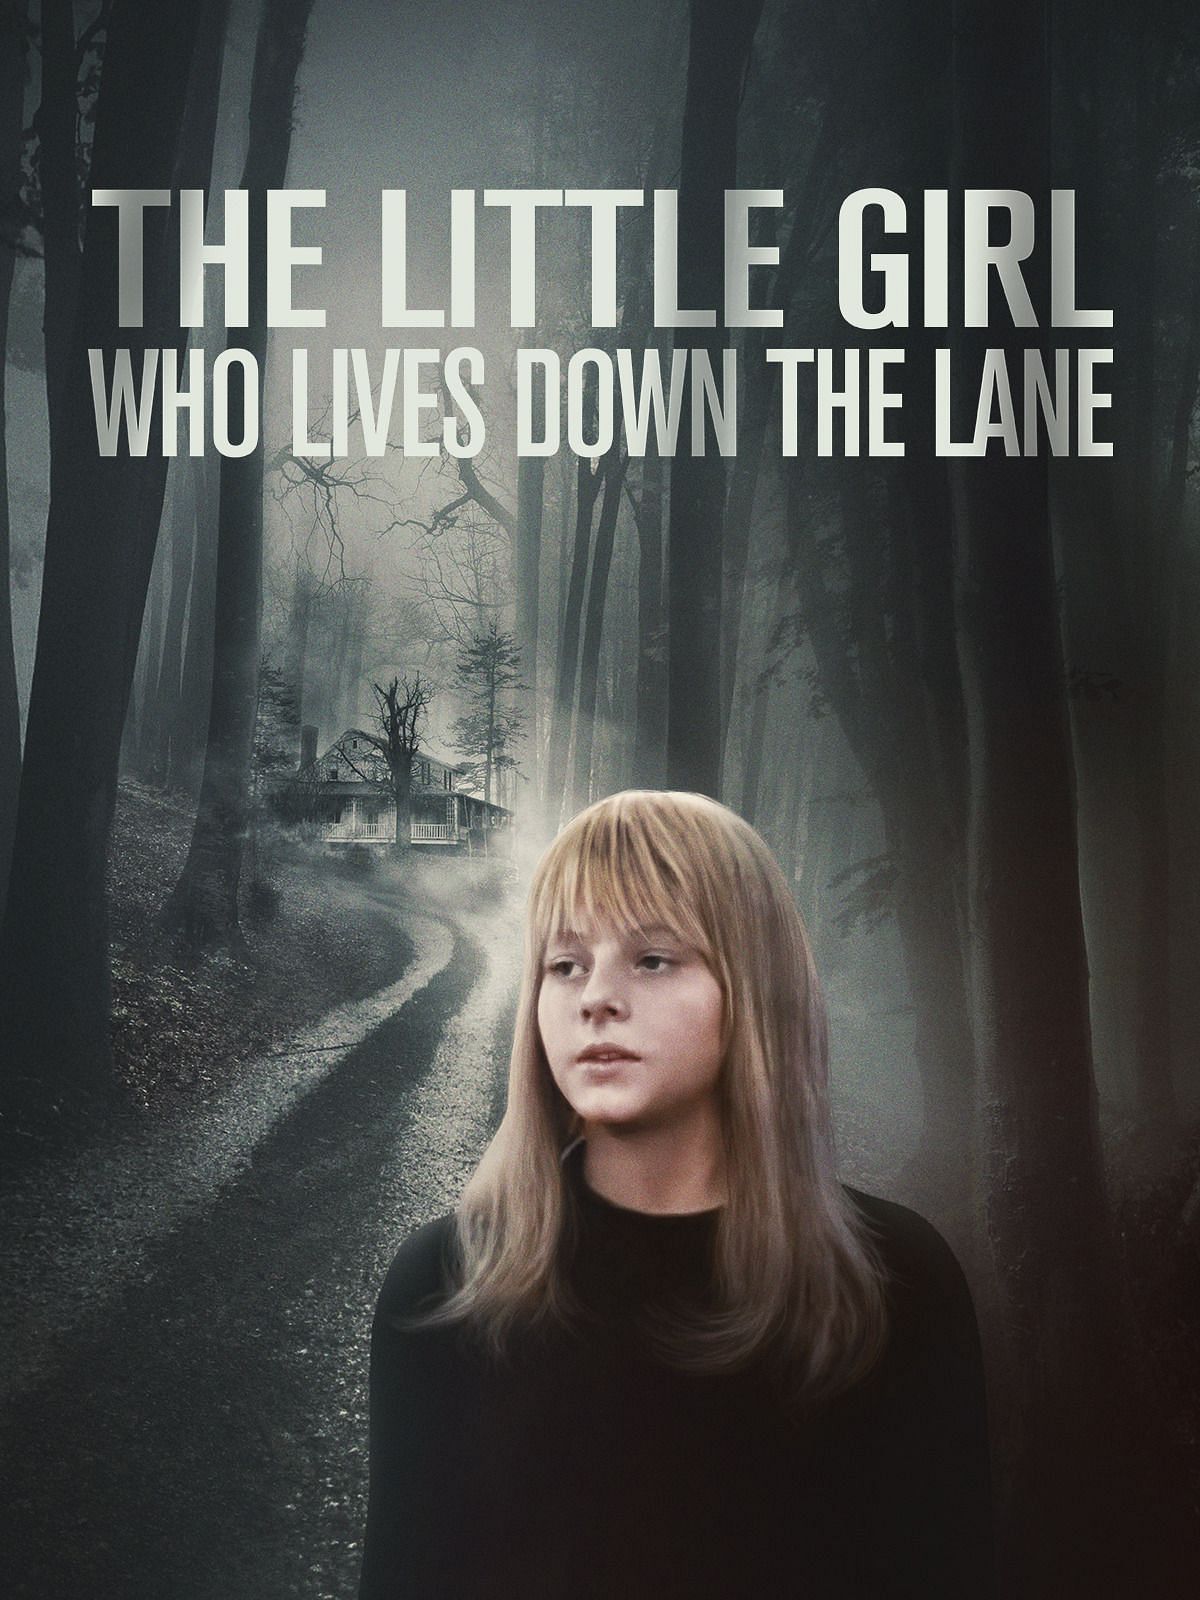 The Little Girl Who Lives Down the Lane (Image via MGM)